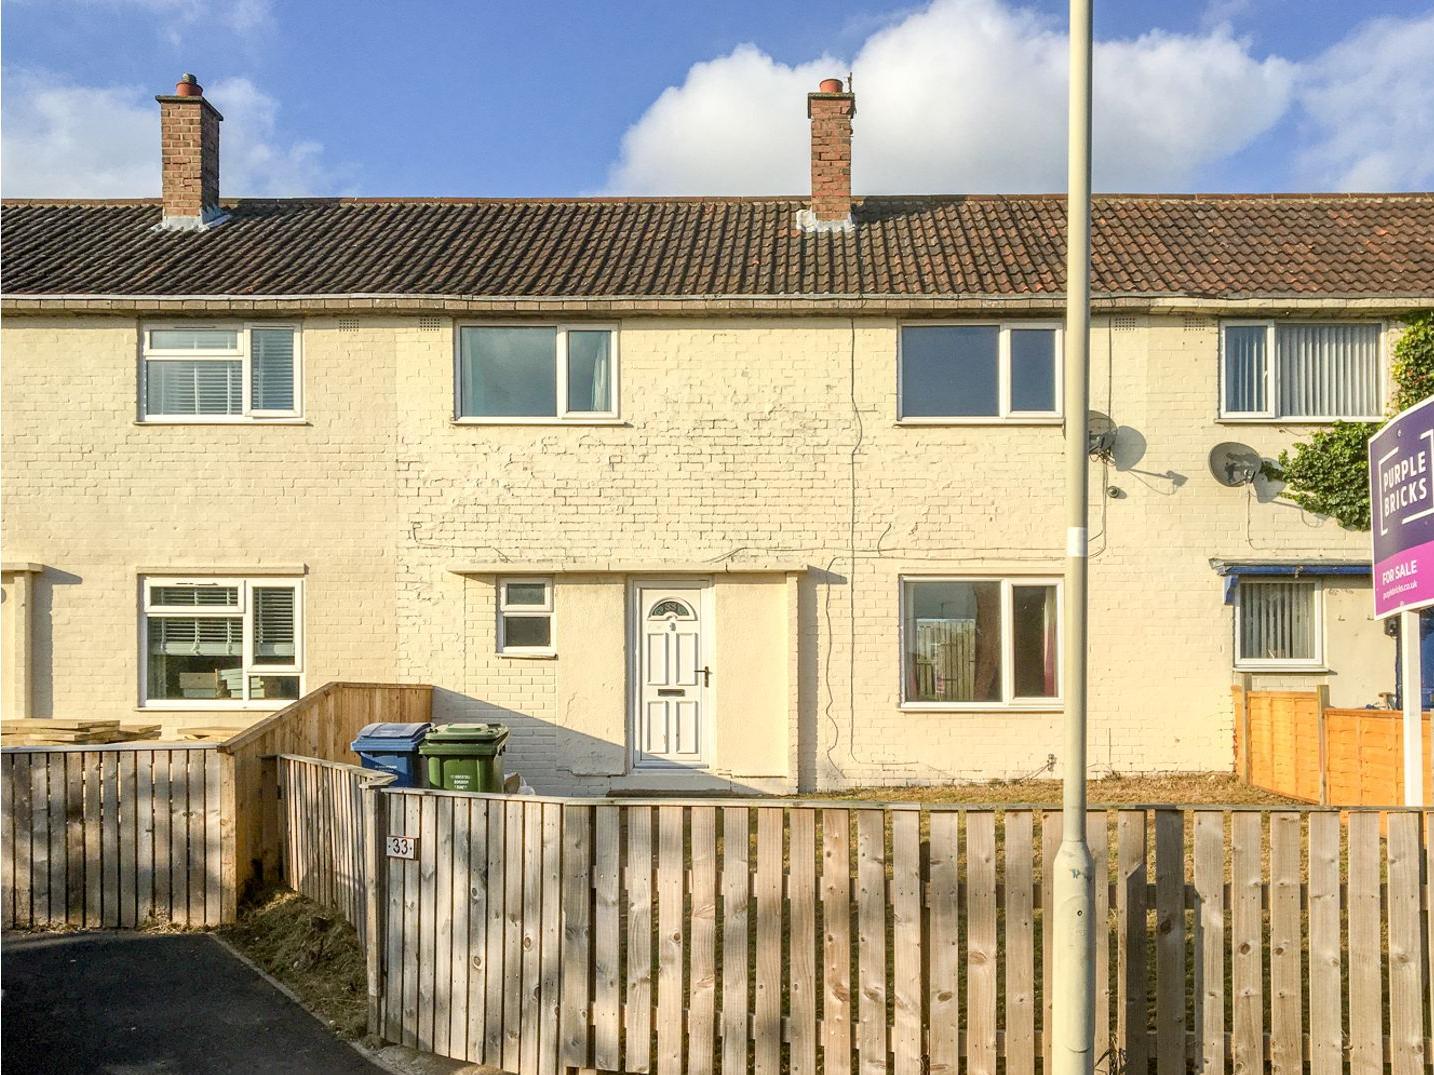 Offered with no onward chain, this three-bedroom house is on sale for 99,950. It is close to Seamer station and has a large rear garden leading to open fields.